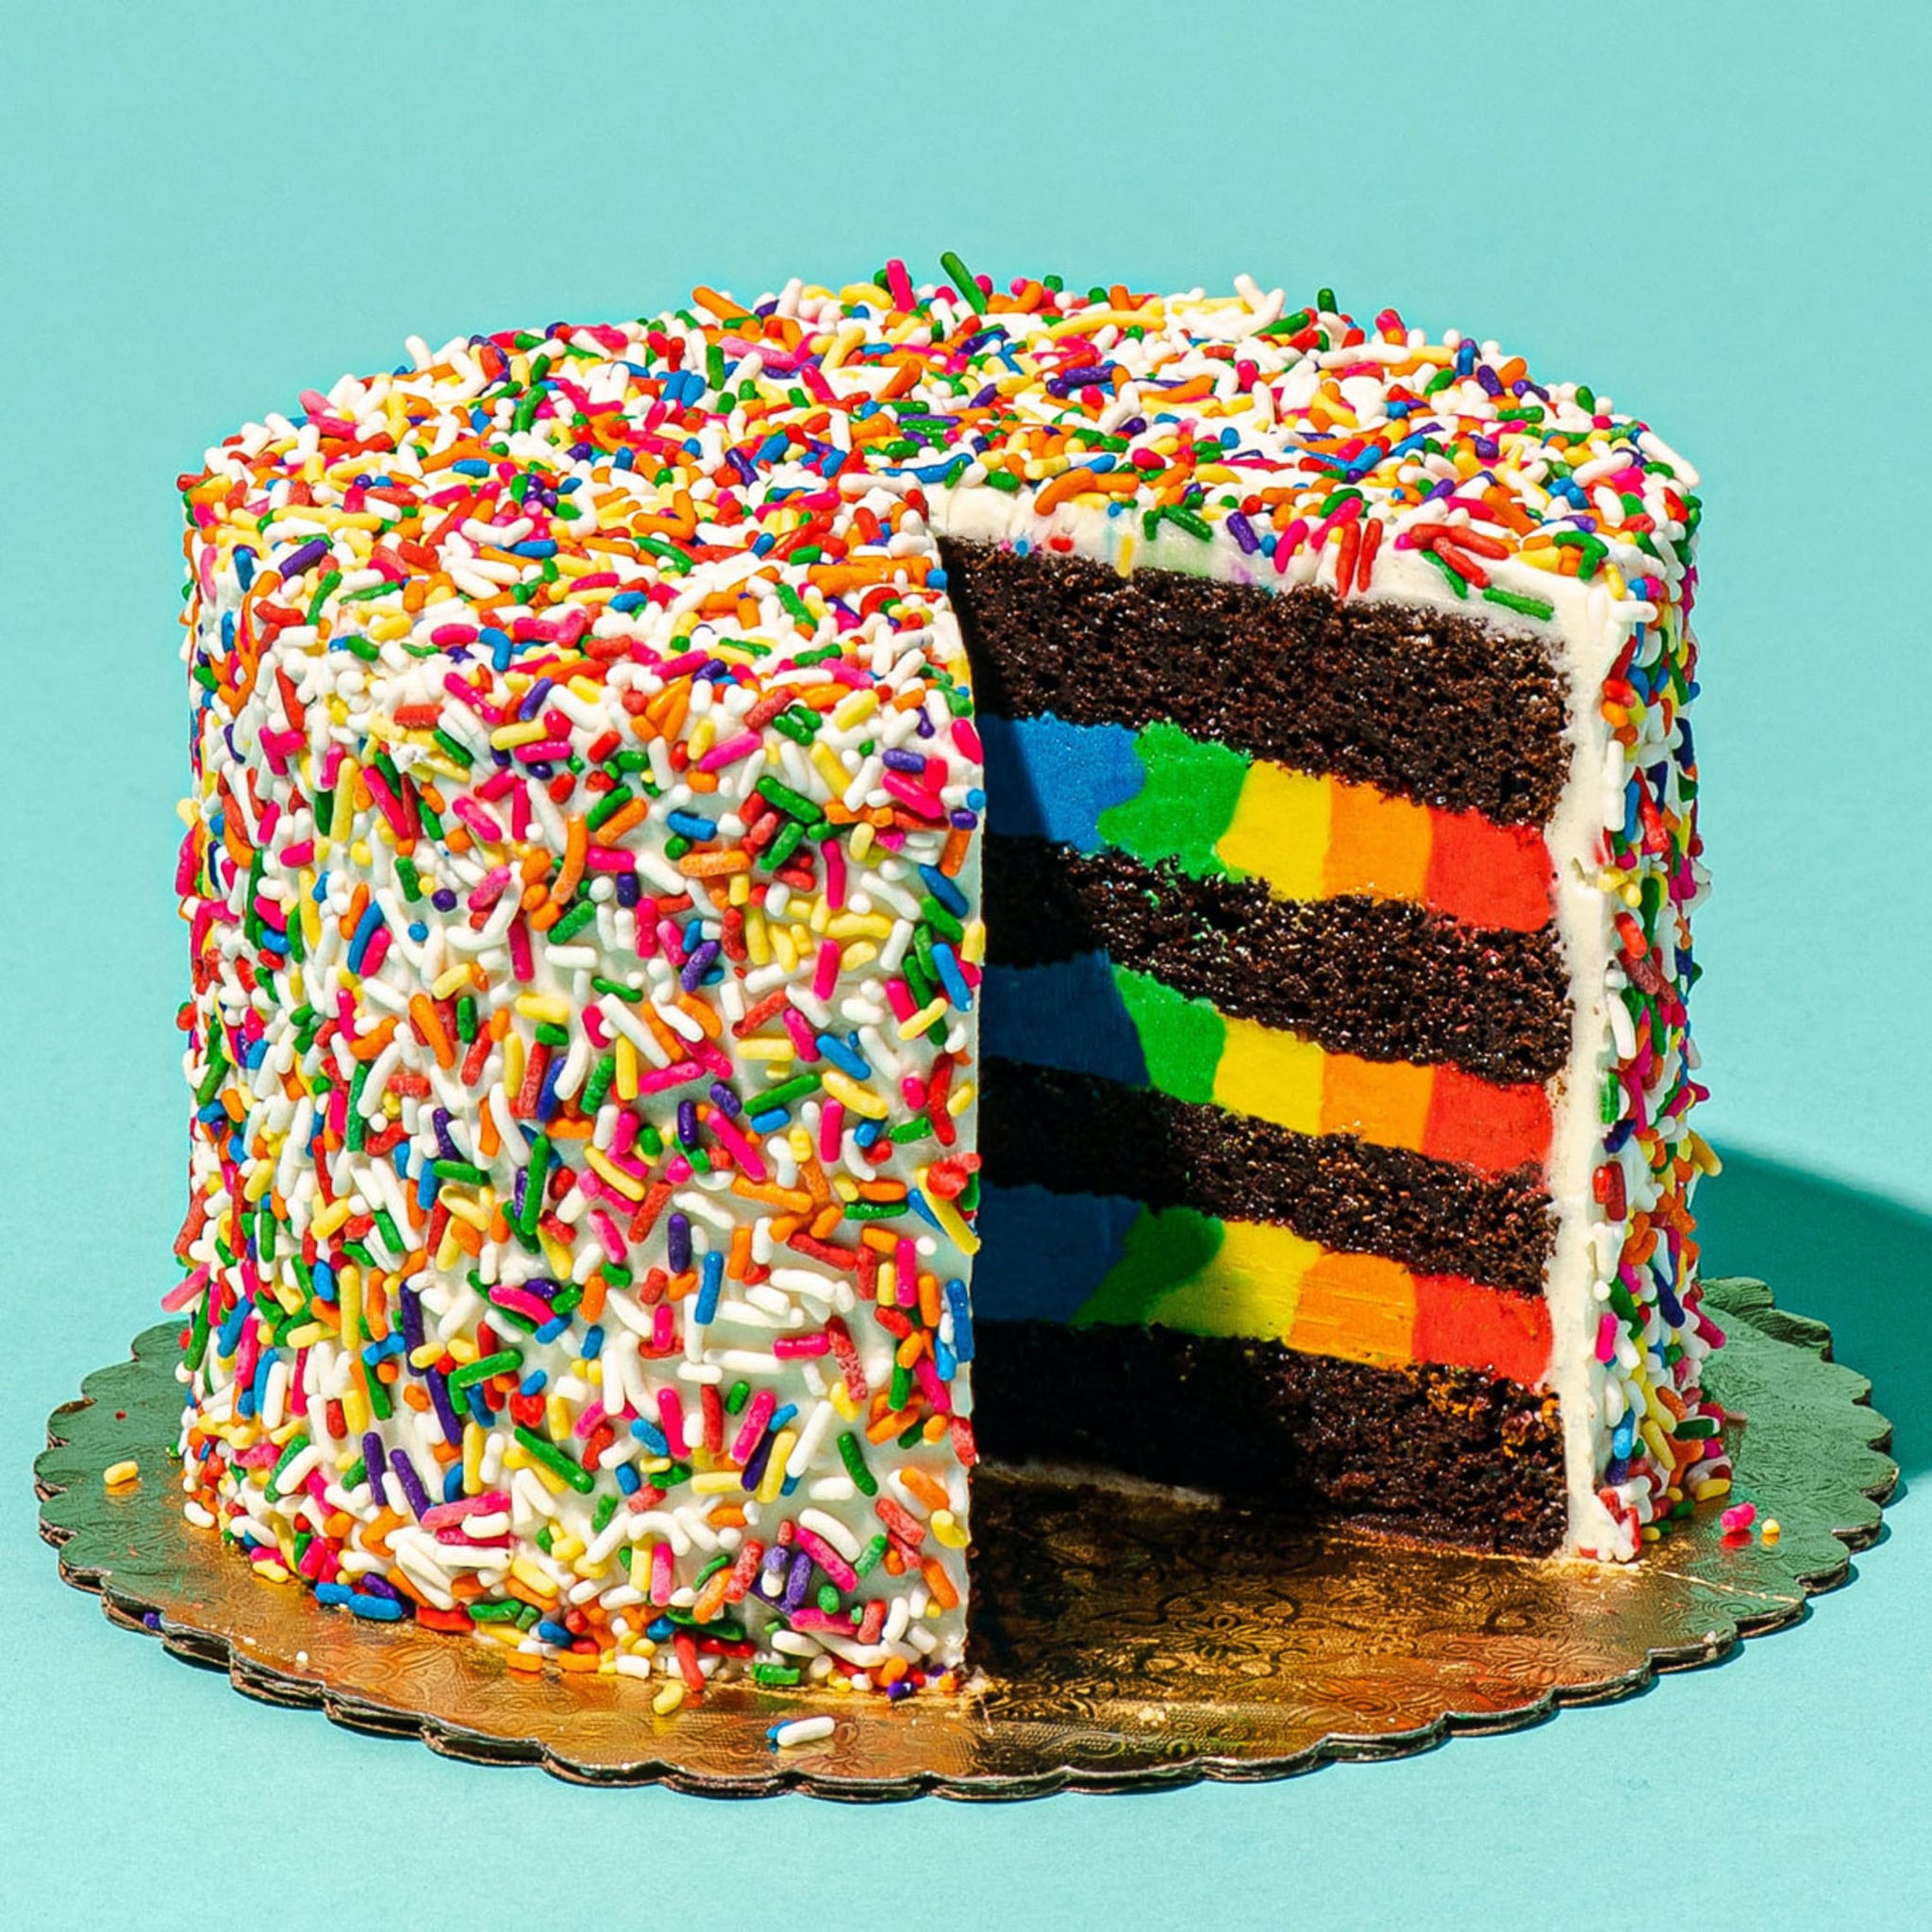 Top 10 Awesome Rainbow Cake Ideas For Your Family  So Yummy Colorful Cake  Recipes  Beyond Tasty  video Dailymotion